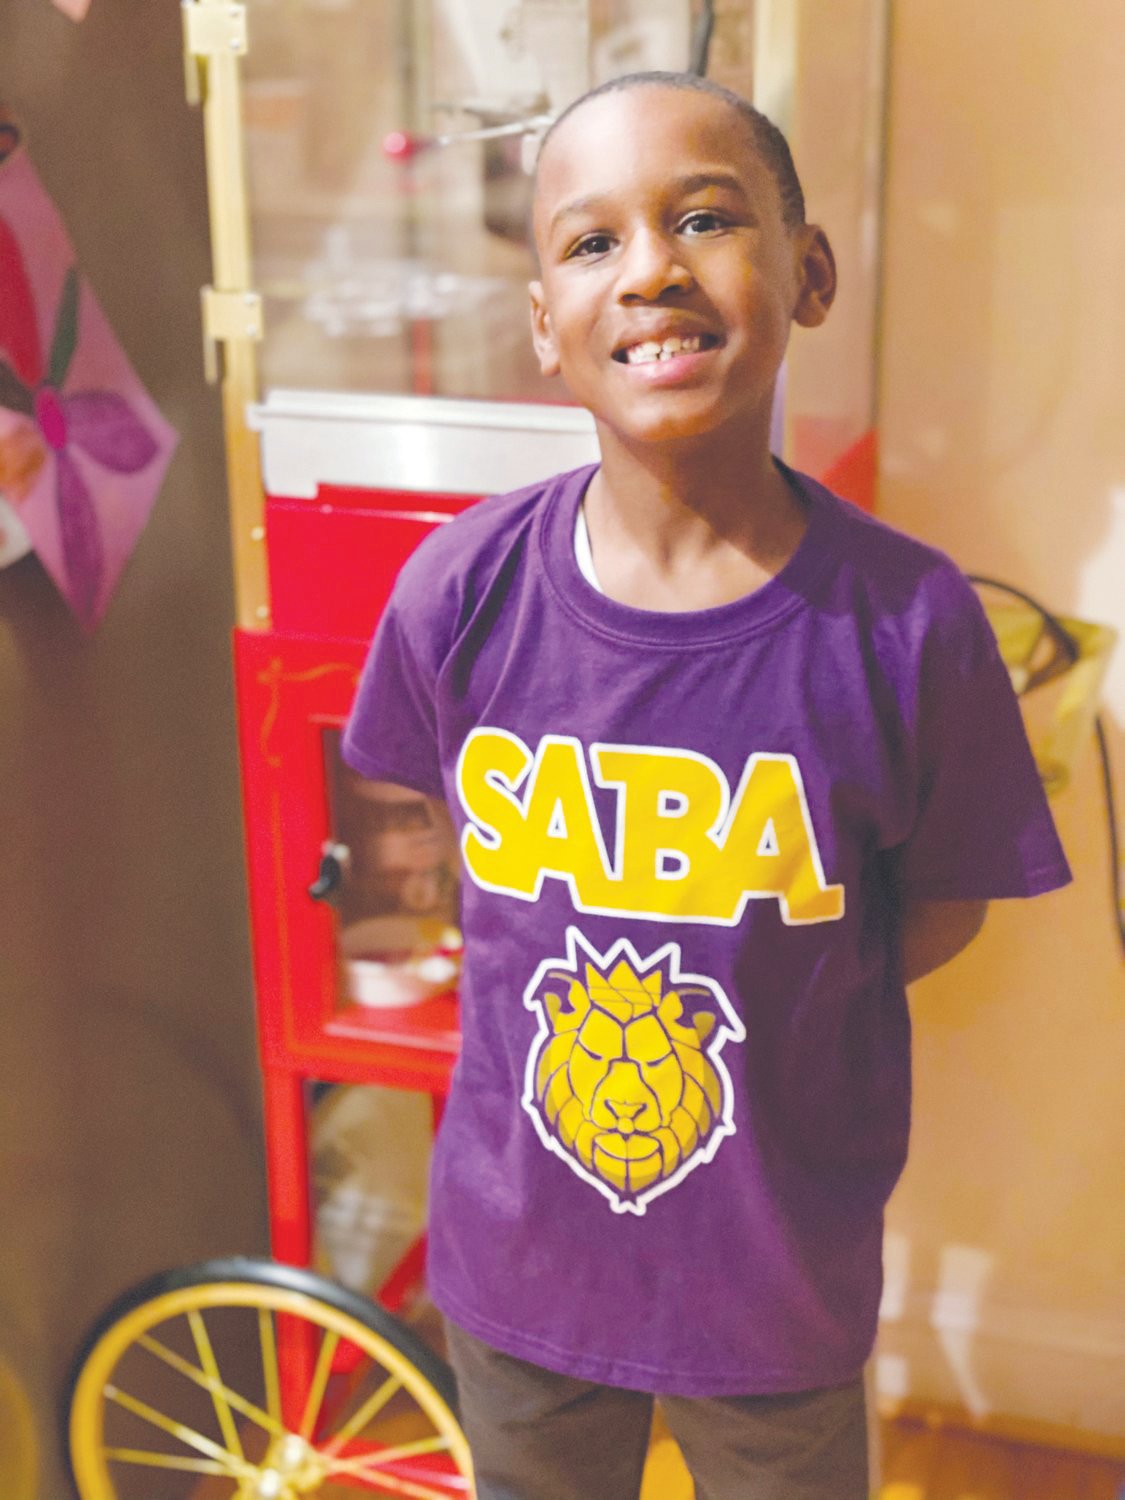 School of the Arts for Boys Academy founder Valencia Toomer’s son, Tyson Toomer, rocking one of the school’s new shirts last February. The school is set to open in fall 2022.